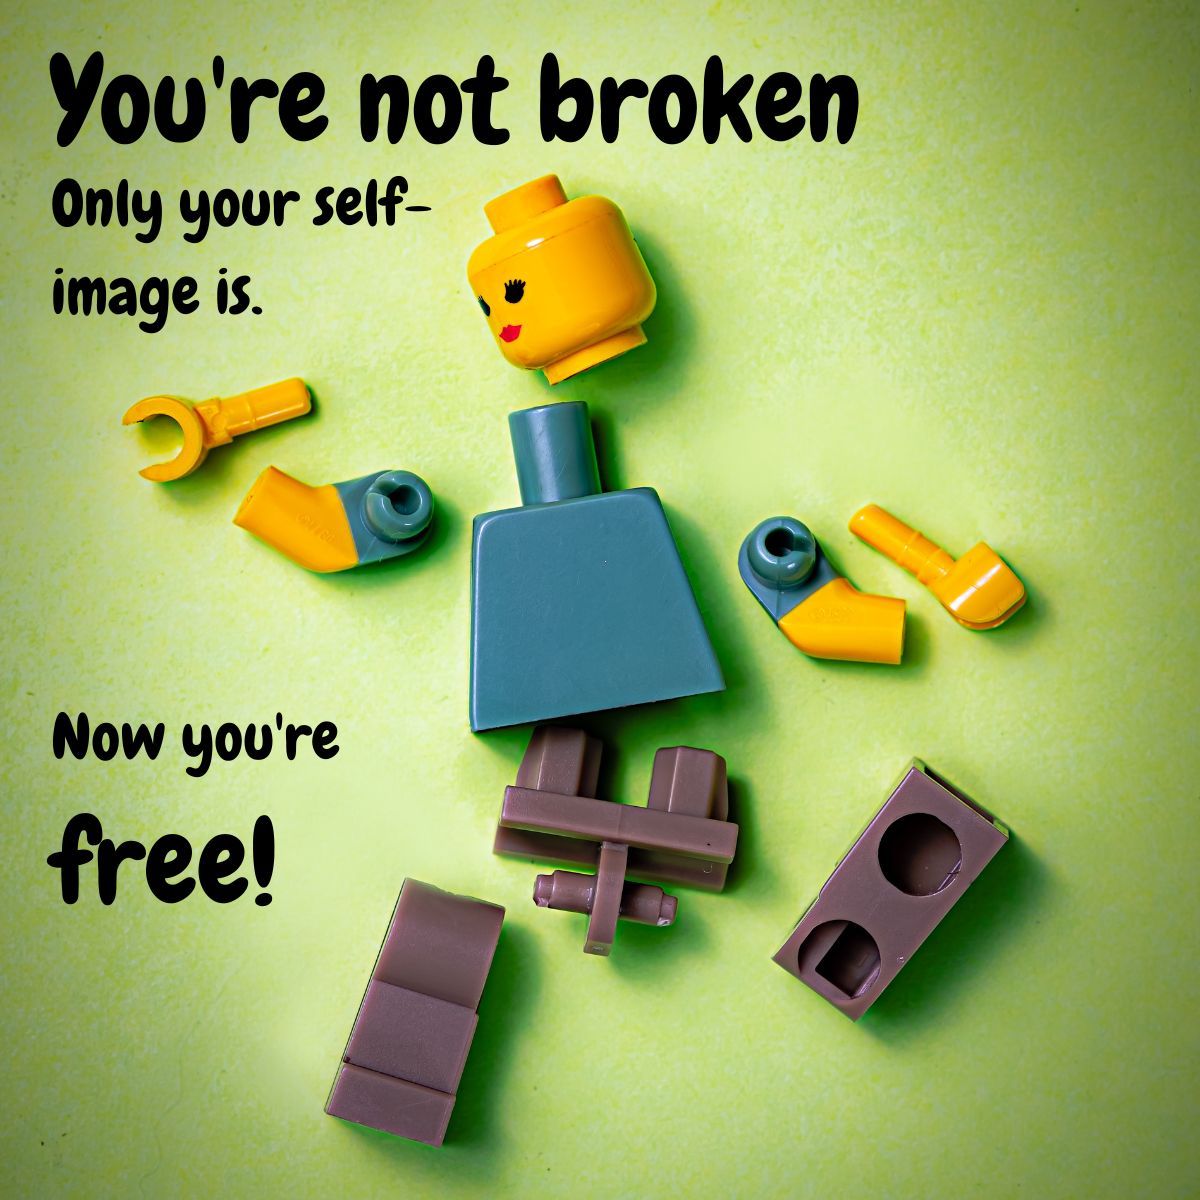 'The days that break you are the days that make you.'

As long as what breaks in you is not your spirit but your desperate grasp on outdated images and stories. Once their hold on you loosens, you are free to see and act with the world as it is . 
#selfimage #freedom